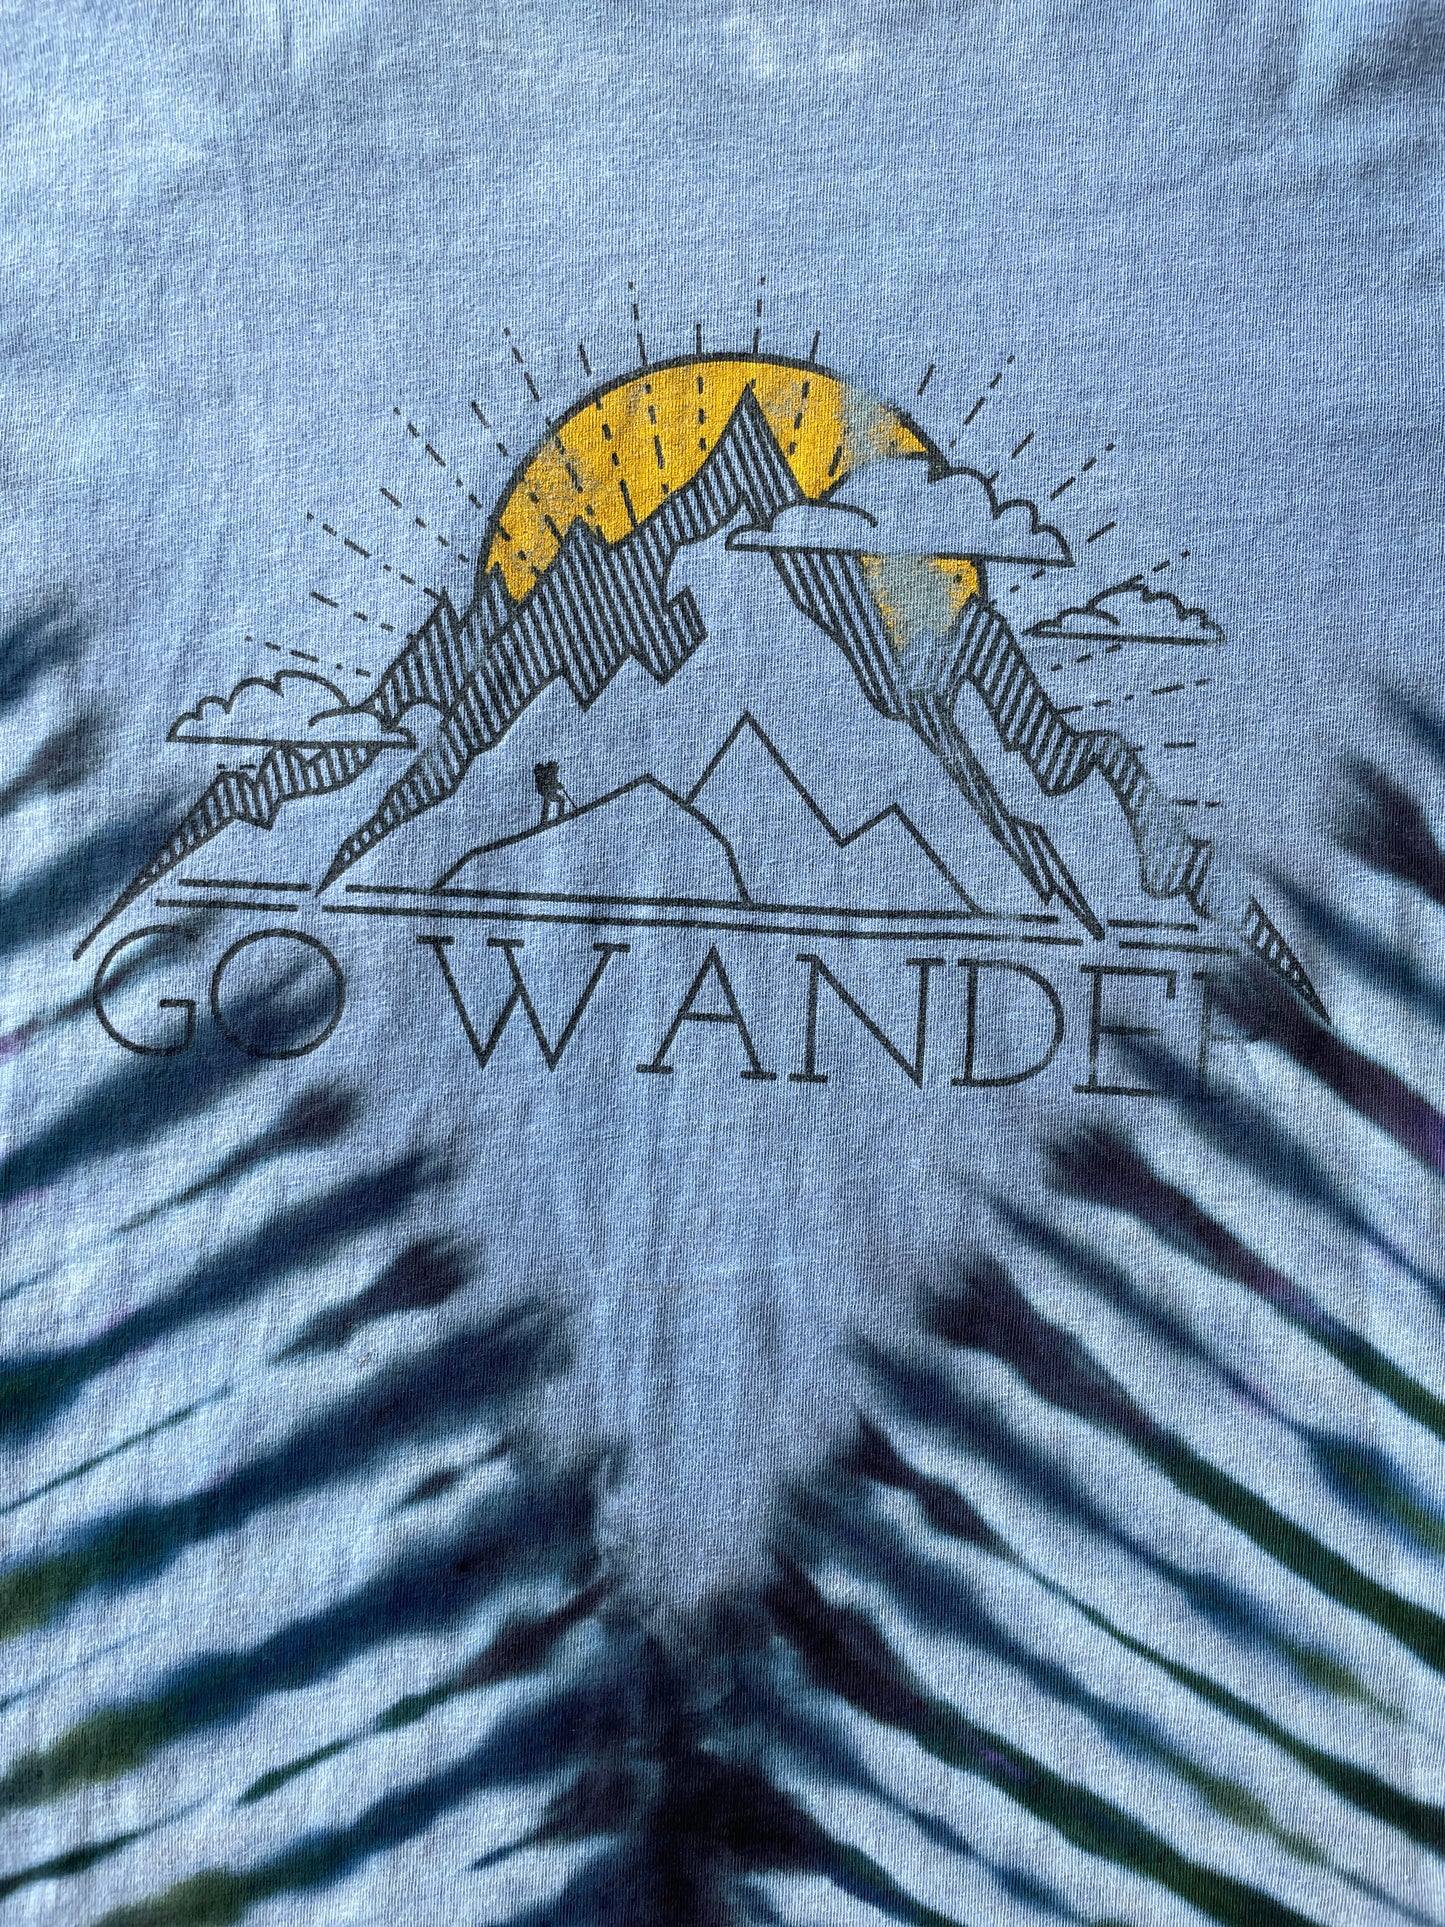 SMALL Men’s Let's Go Wander Mountainscape Handmade Tie Dye T-Shirt | One-Of-a-Kind Blue and Black Short Sleeve